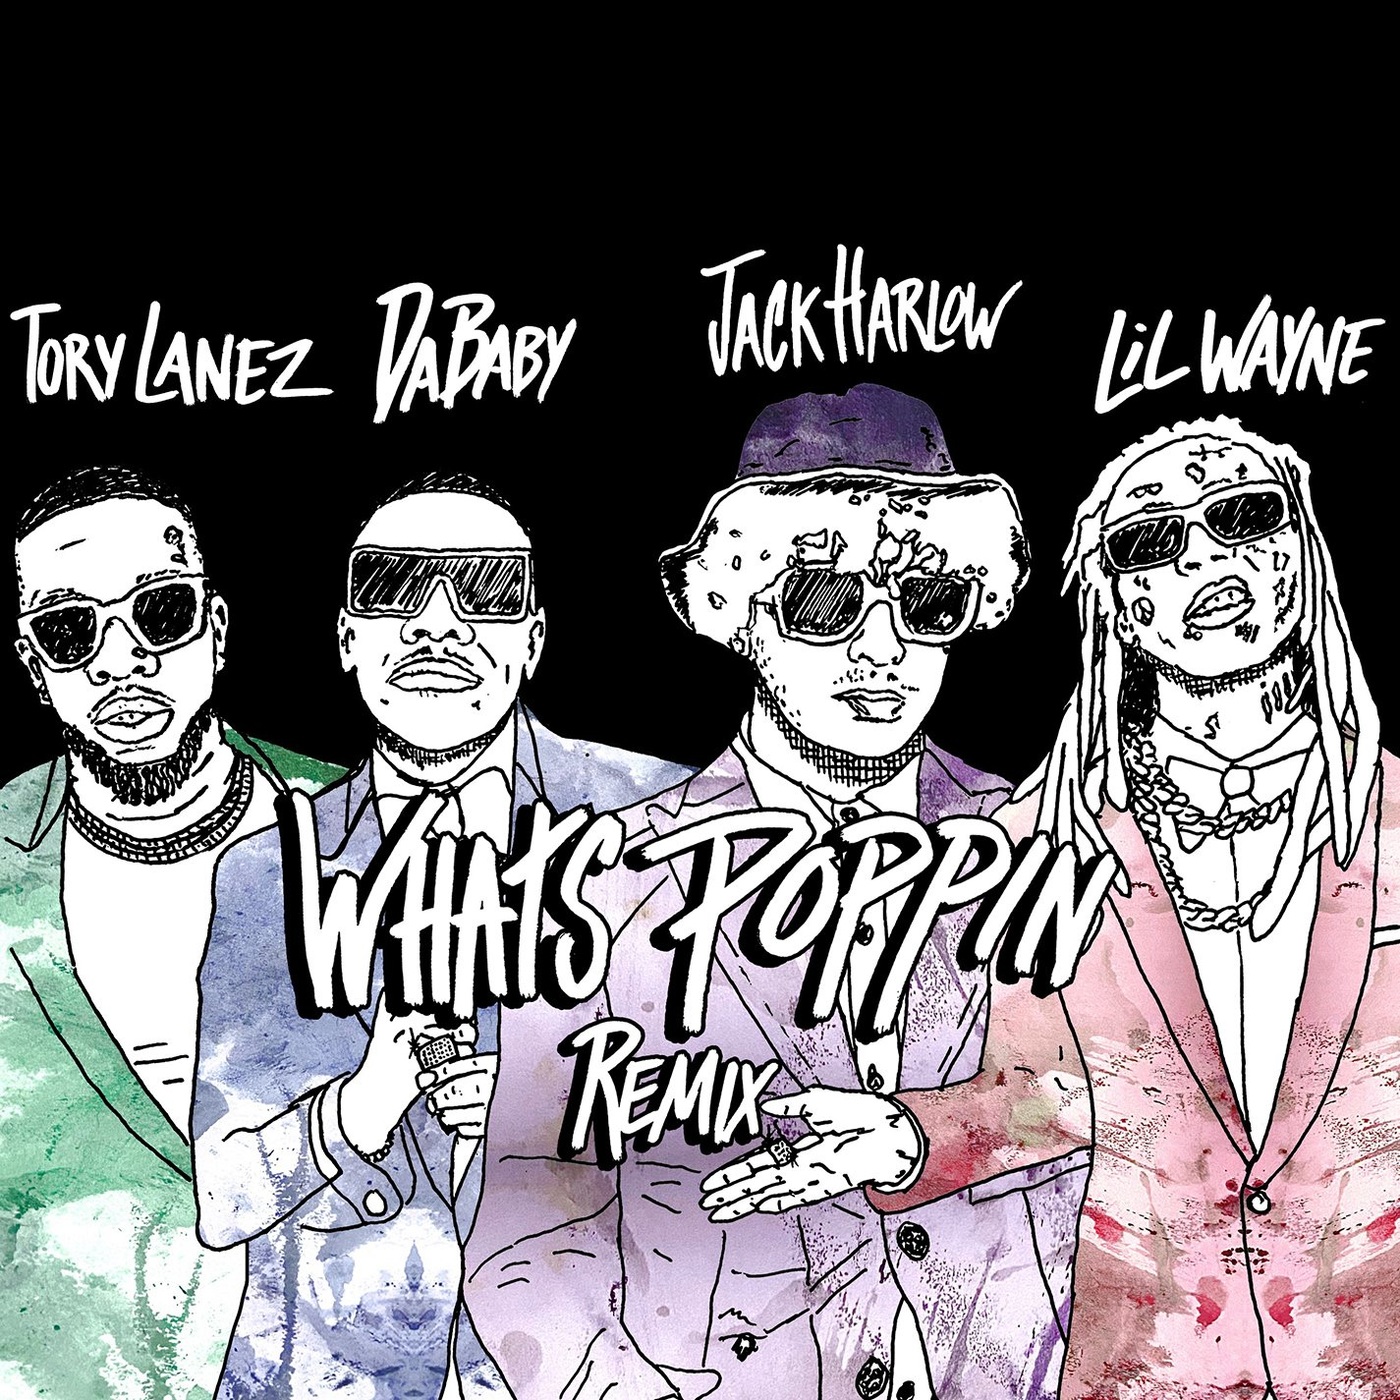 Art for WHATS POPPIN (Remix)  by Jack Harlow ft DaBaby, Lil Wayne & Tory Lanez